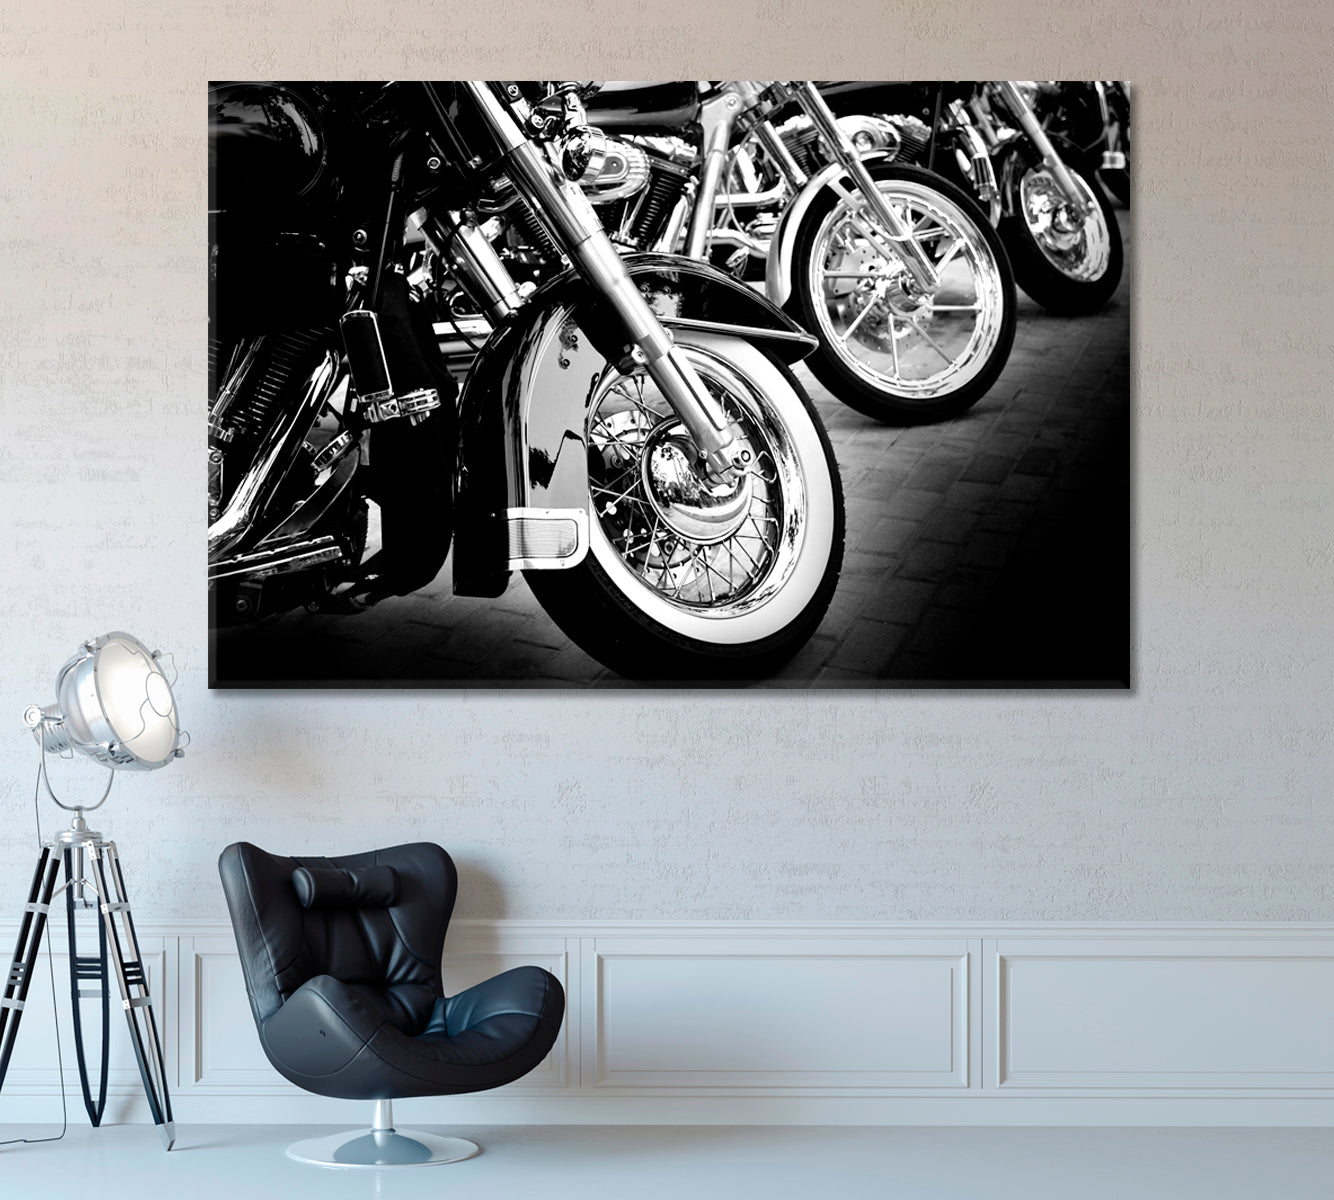 Motorbikes in Black and White Canvas Print ArtLexy 1 Panel 24"x16" inches 